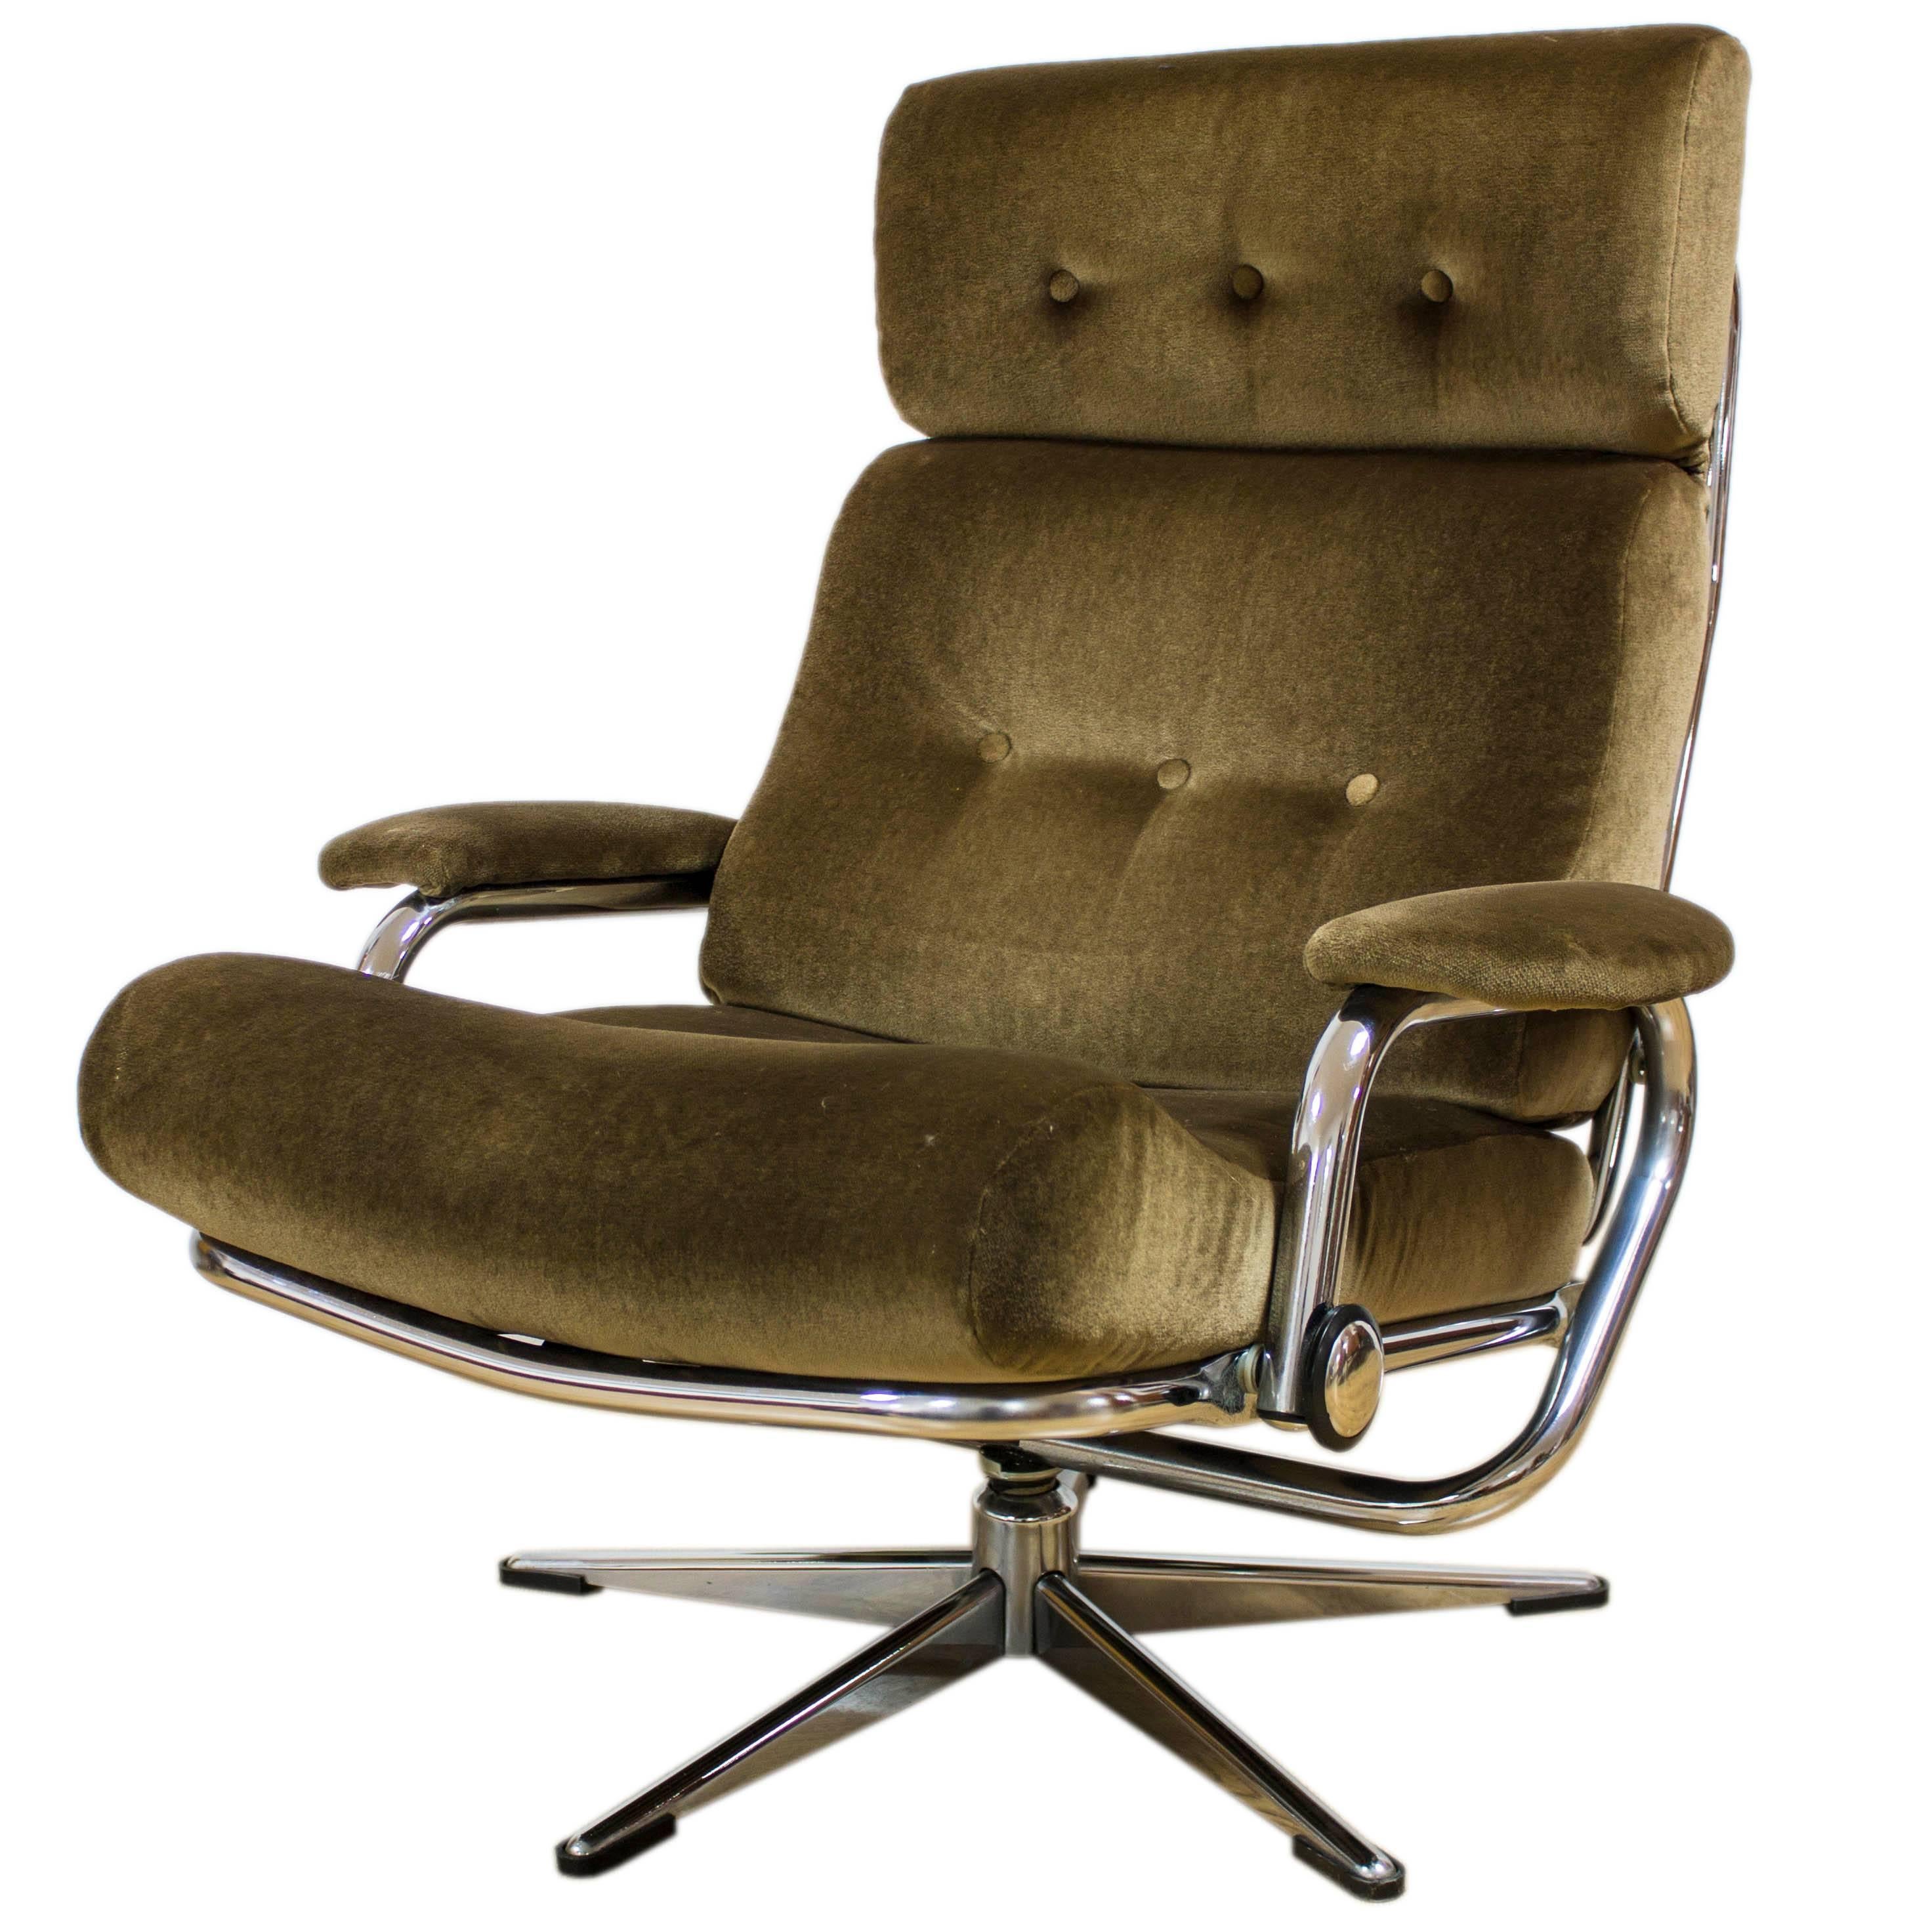 Danish Design Chrome and Fabric Recliner Armchairs Retro G Plan Eames Era For Sale